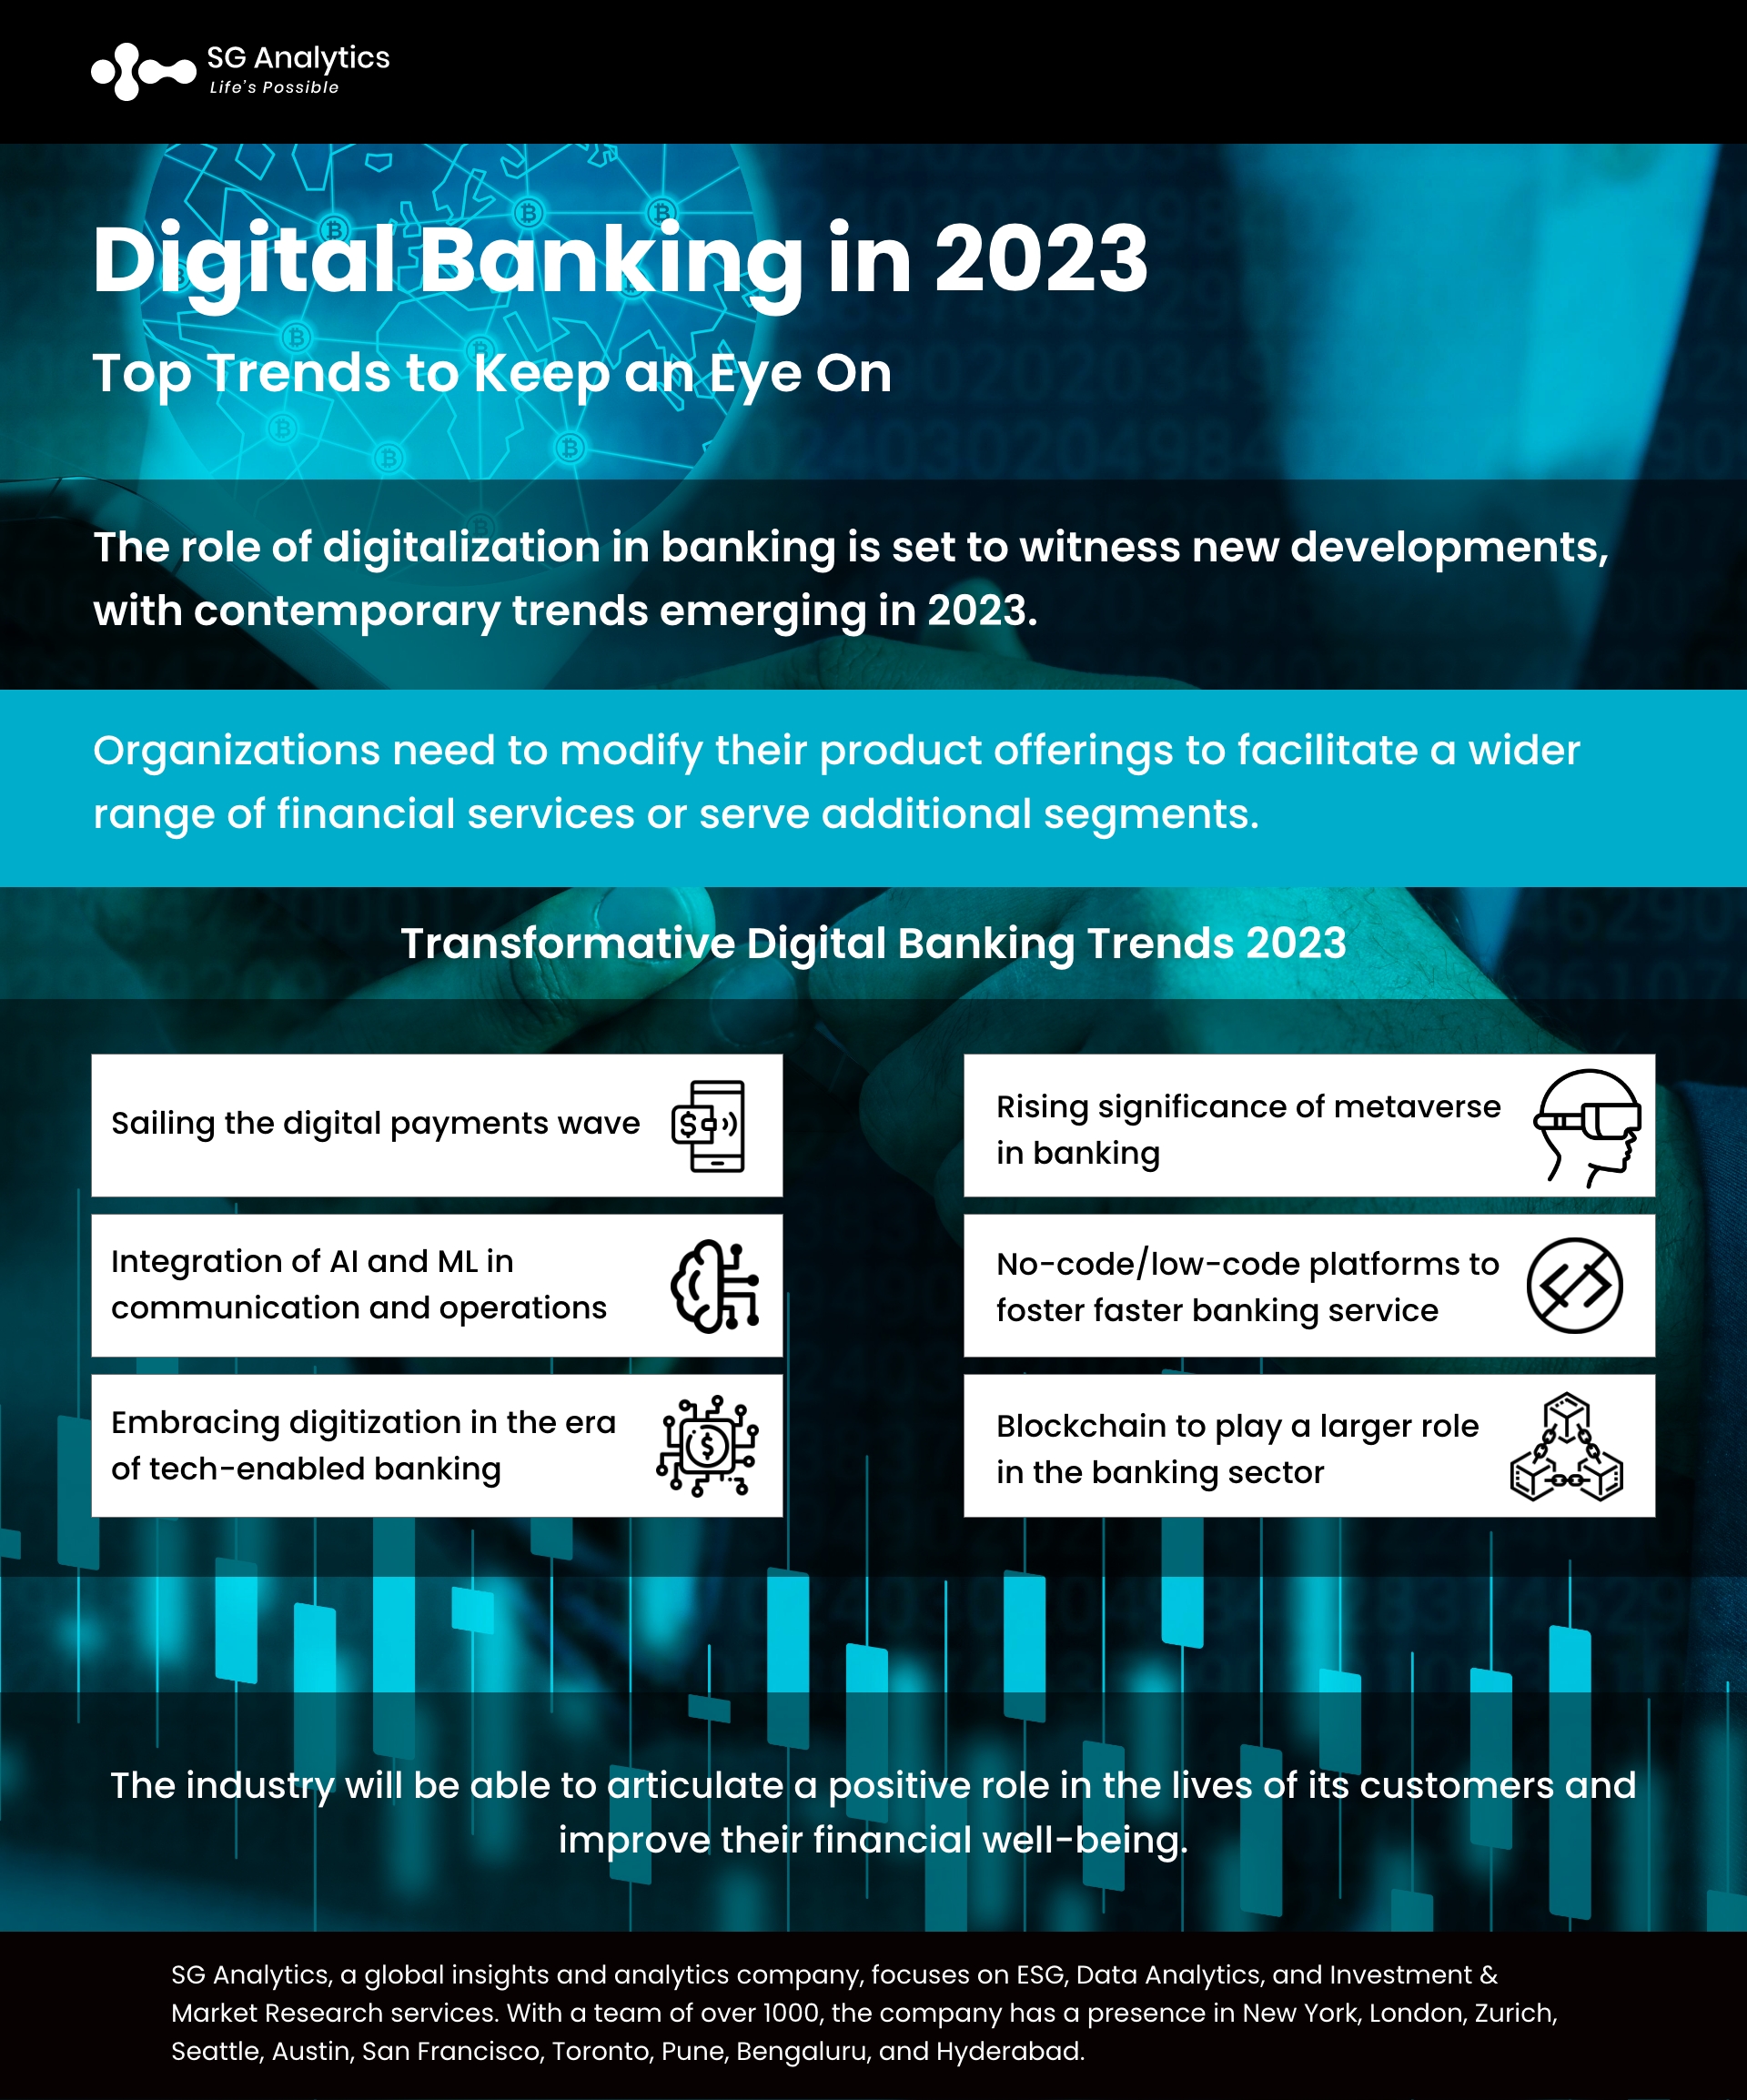 Digital Banking in 2023 - Top Trends to Keep an Eye On